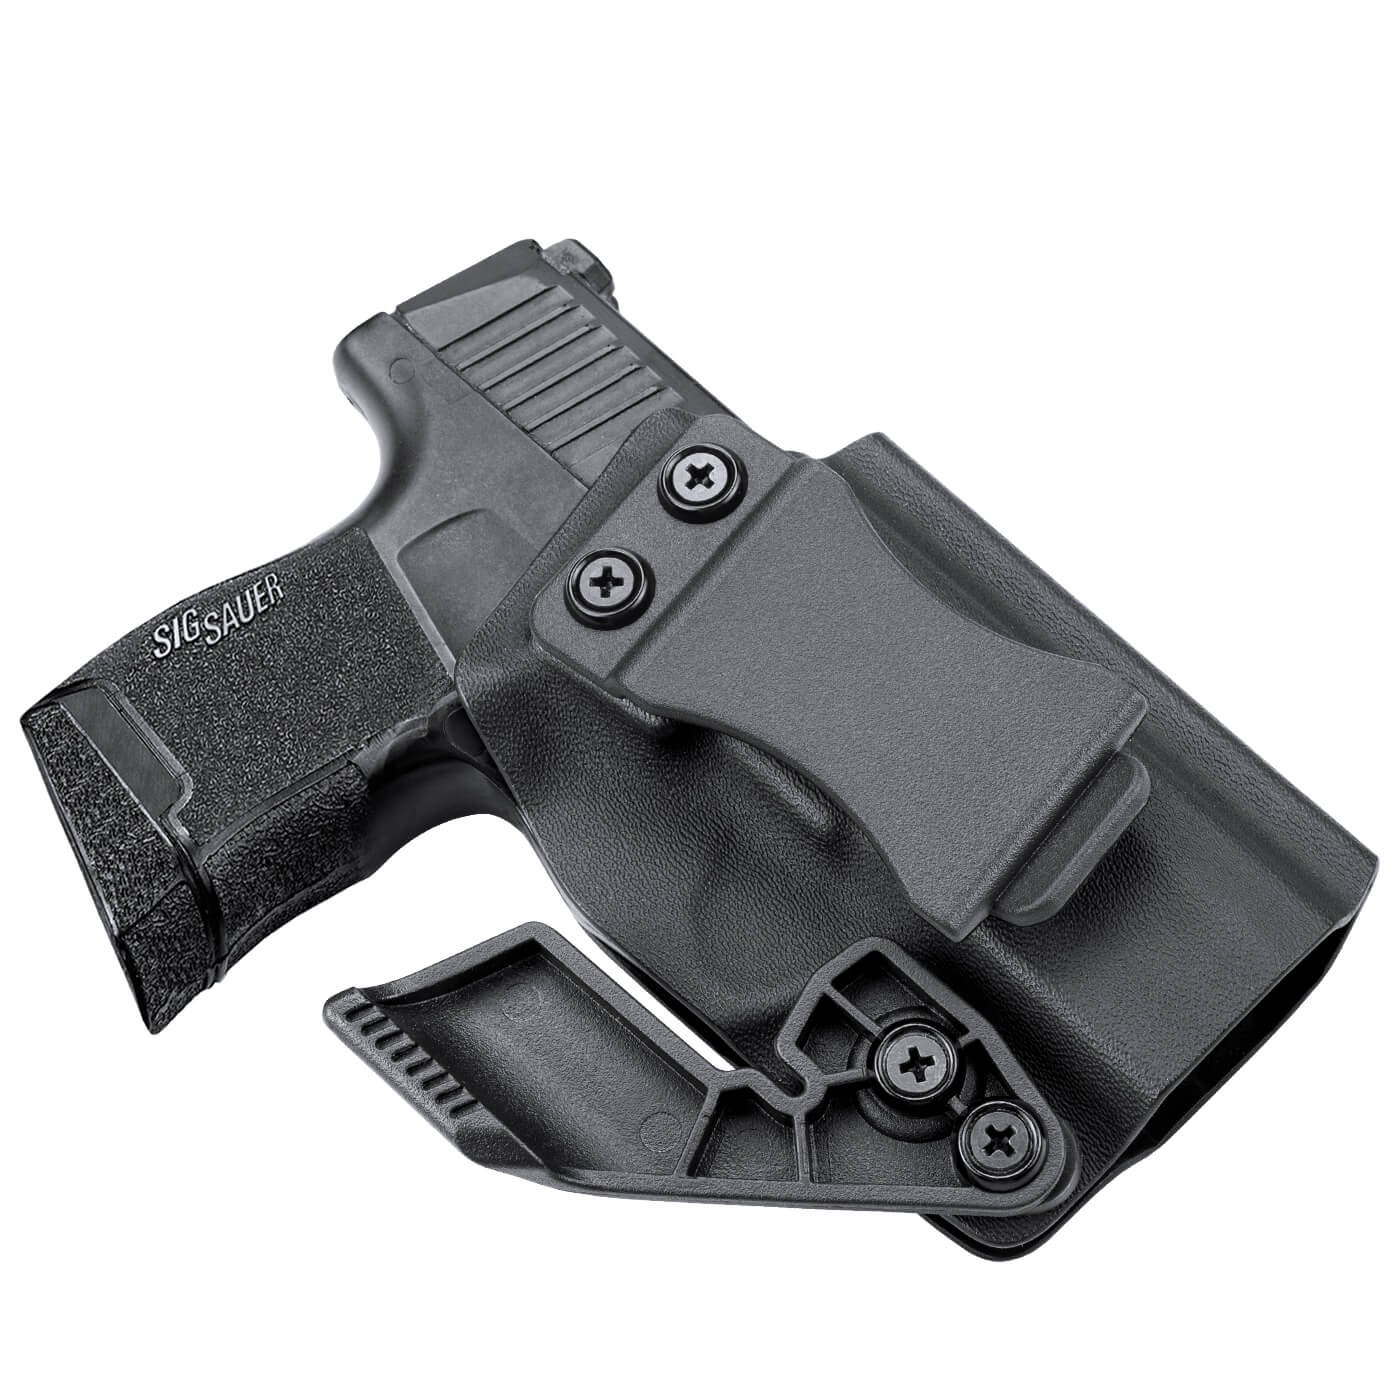  5-Pack 1.5 Inch 1.75 Inch Holster Clip for IWB & OWB